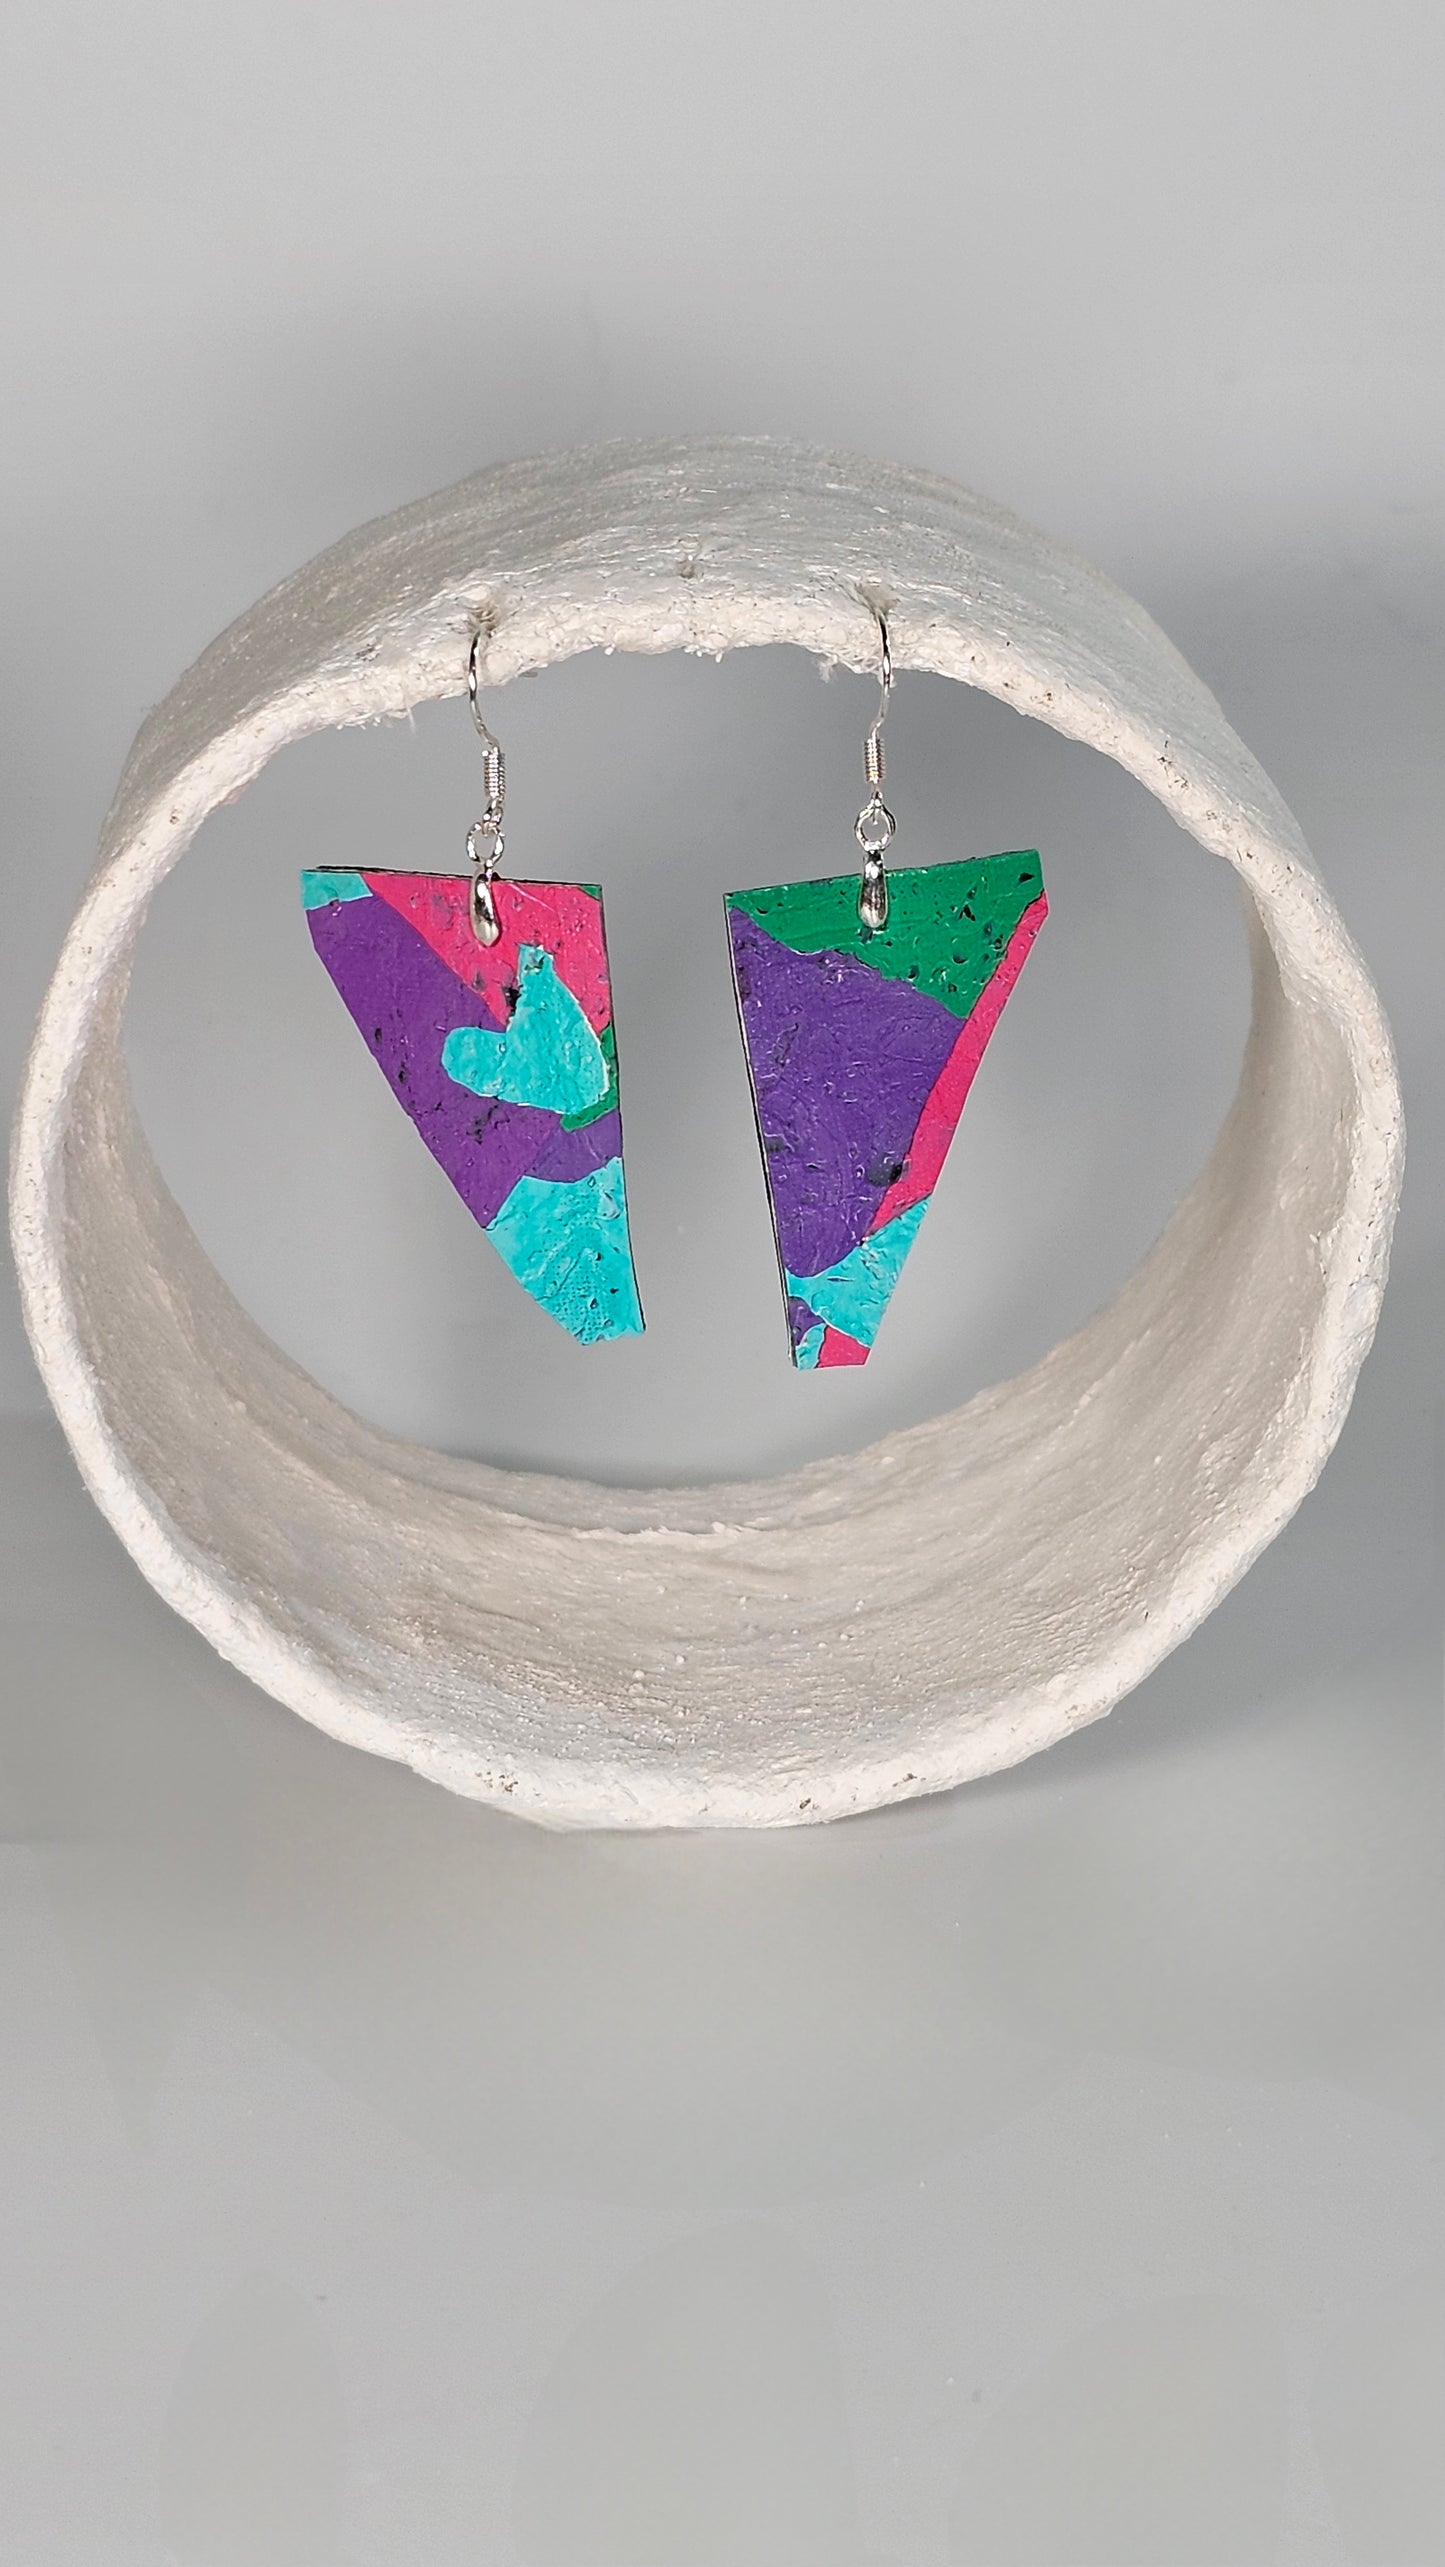 Small colourful patterned triangle shape earrings in green pink and purple - PLASTIQUE By Siân